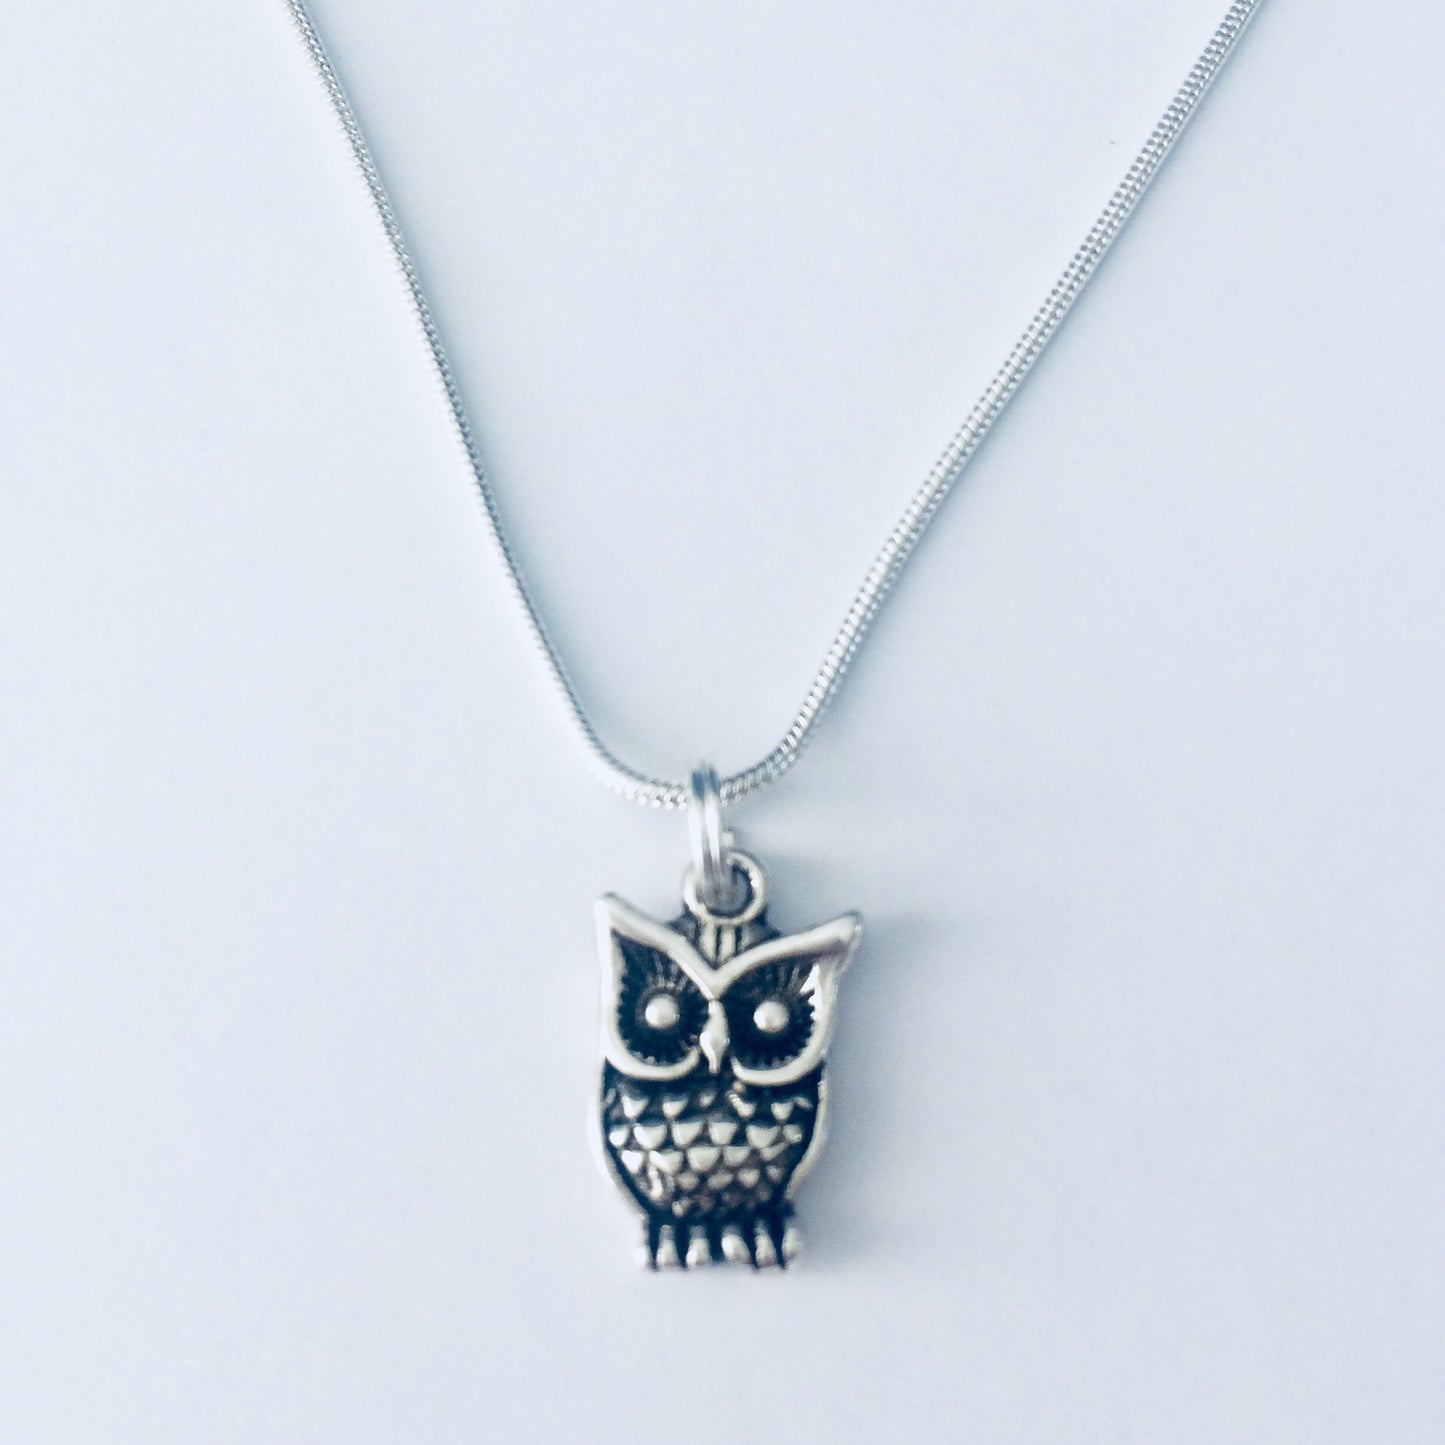 Owl Necklace, Owl Gift Ideas, Owl Lover Pendant, Night Owl, Bird Necklace, Bird Pendant, Nocturnal Person, Bird Lover Gifts, Owl Sanctuary.